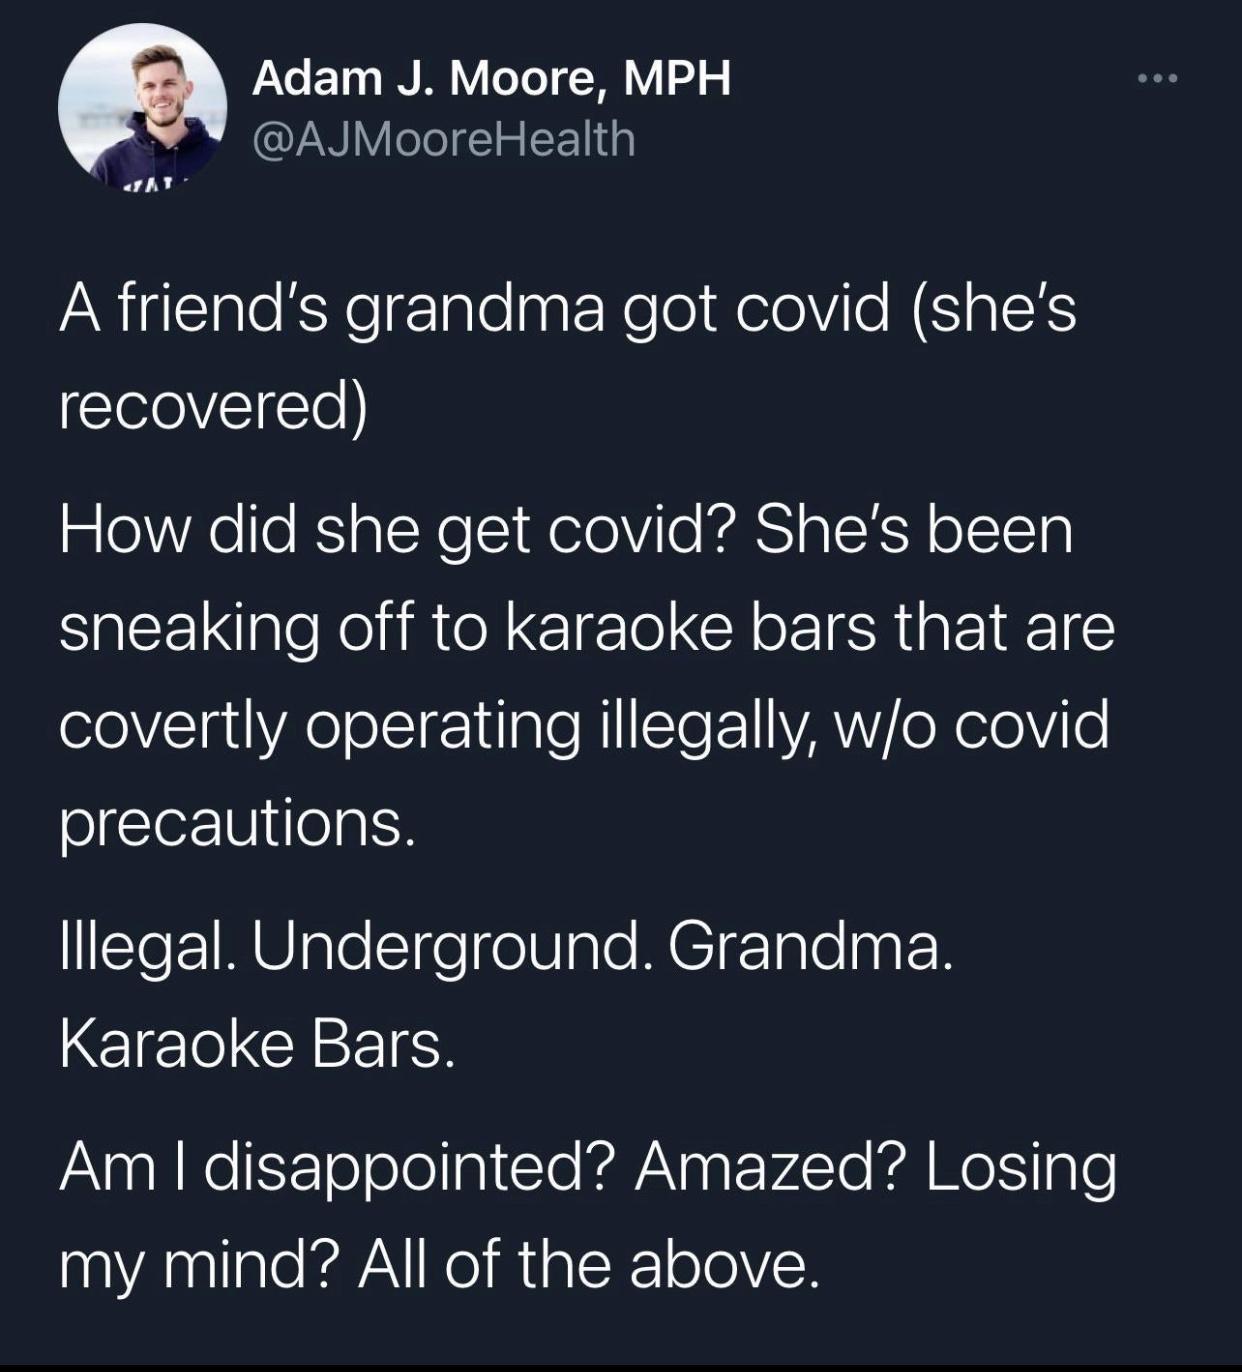 atmosphere - .. Adam J. Moore, Mph A friend's grandma got covid she's recovered How did she get covid? She's been sneaking off to karaoke bars that are covertly operating illegally, wo covid precautions. Illegal. Underground. Grandma. Karaoke Bars. Am I d